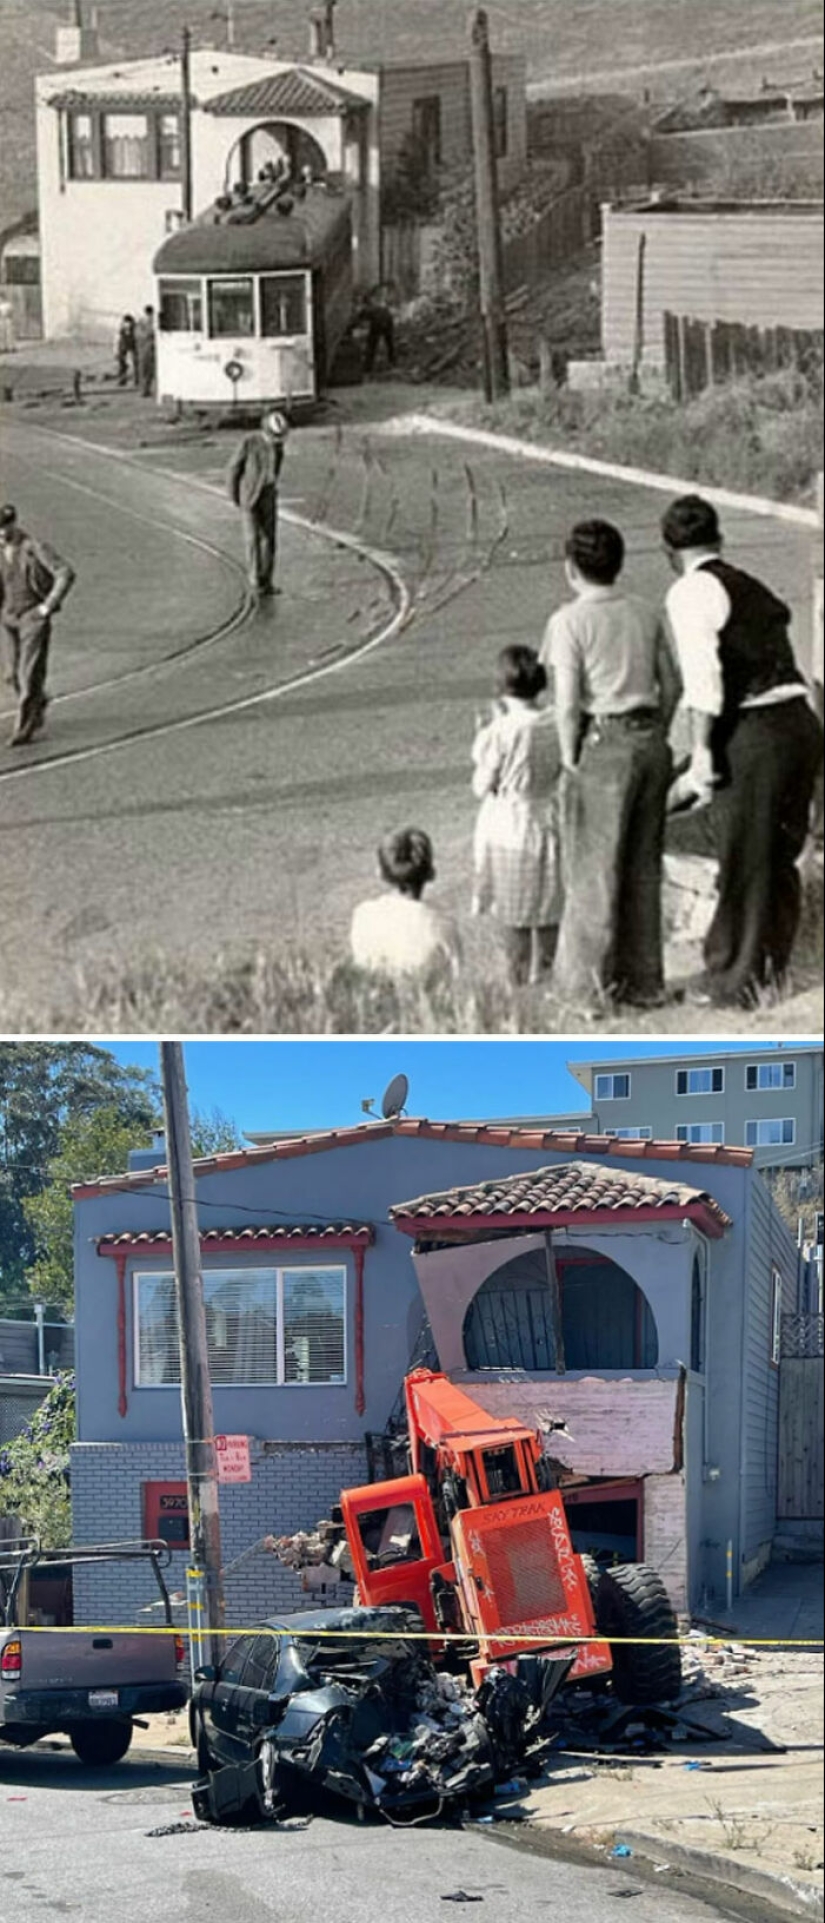 15 ‘Then And Now’ Pics That Show How Times Have Changed, Shared On ‘Old Photos In Real Life’